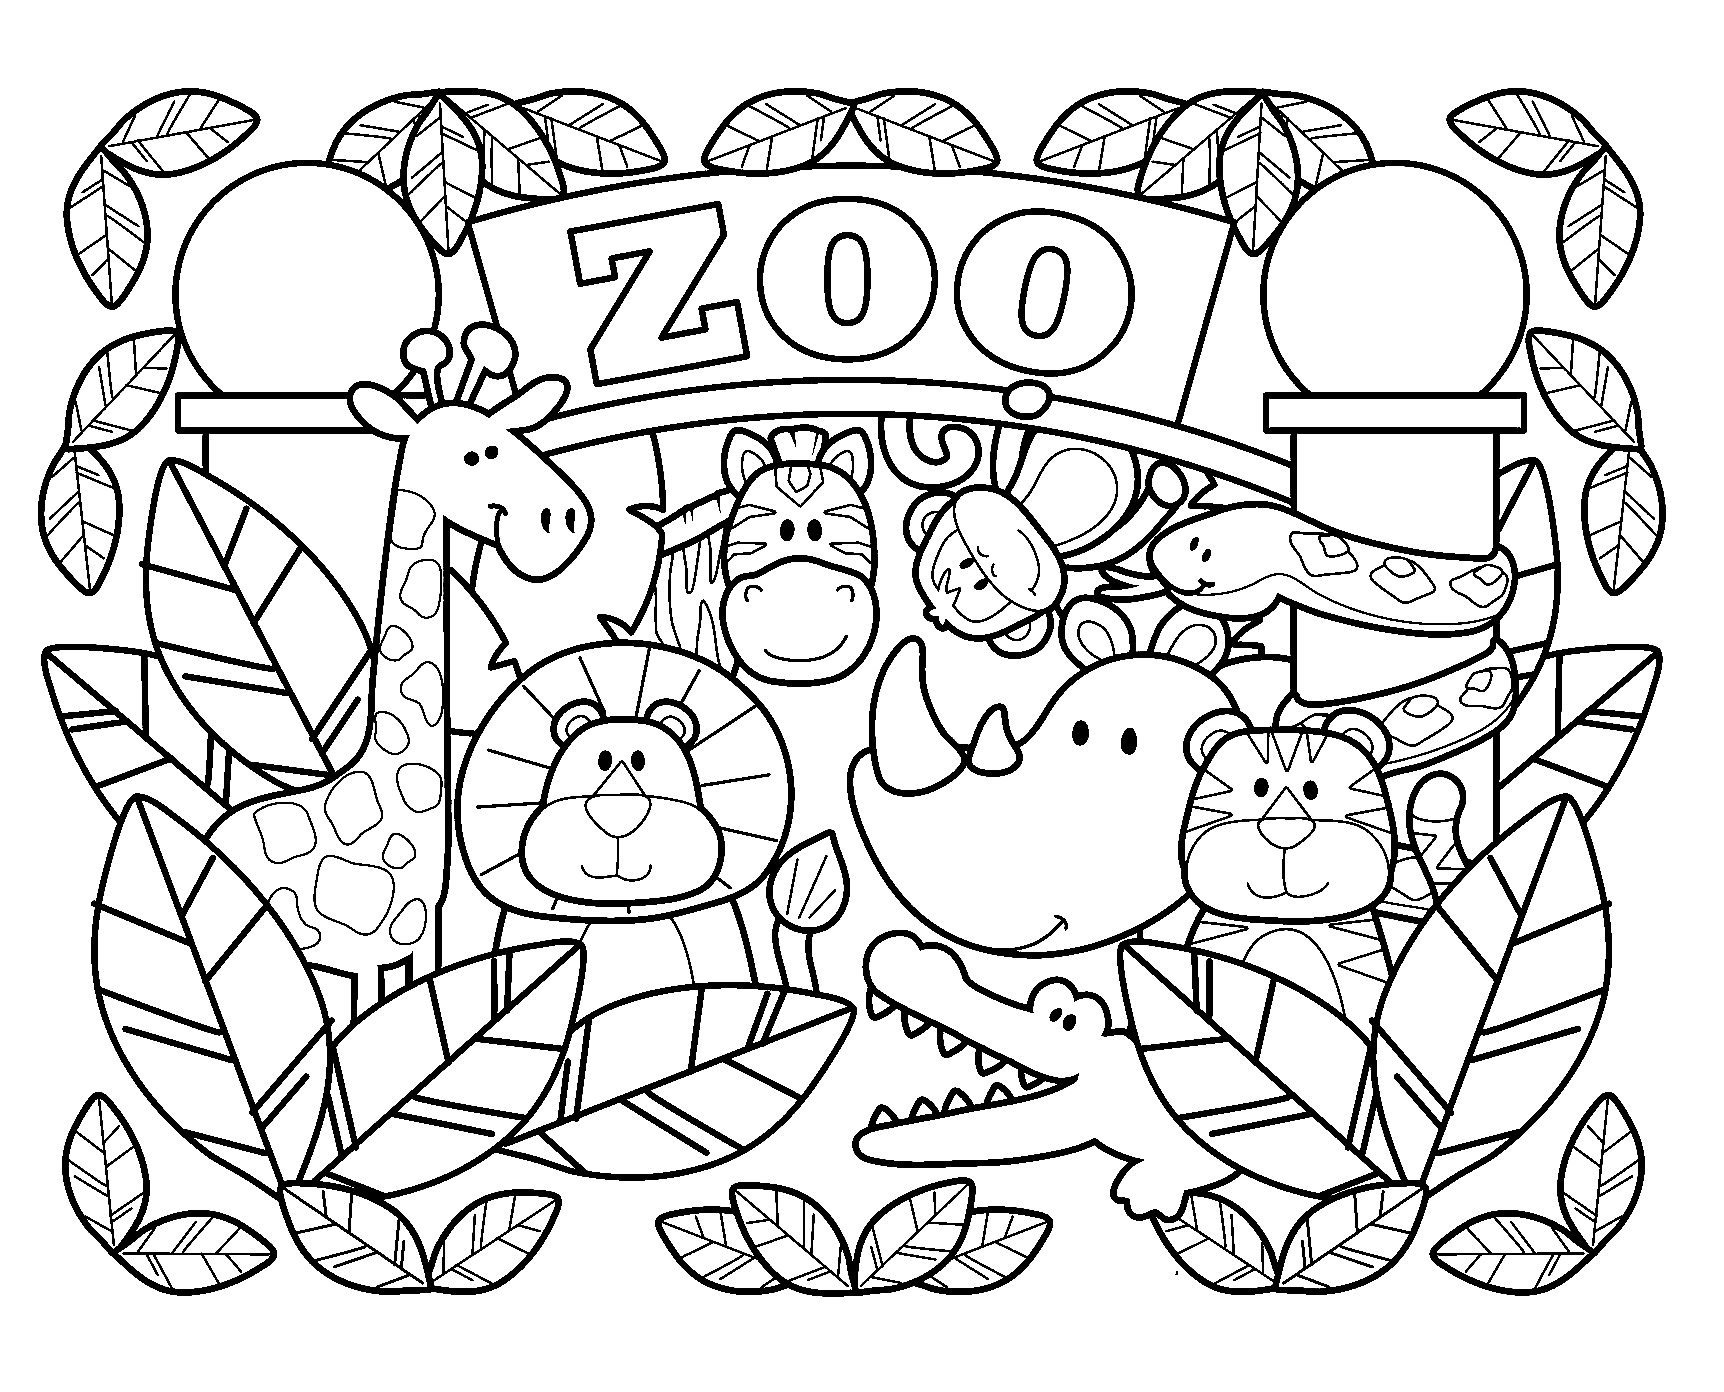 Zoo Coloring Pages   Zoo Coloring Pages   Coloring Pages For Kids ...